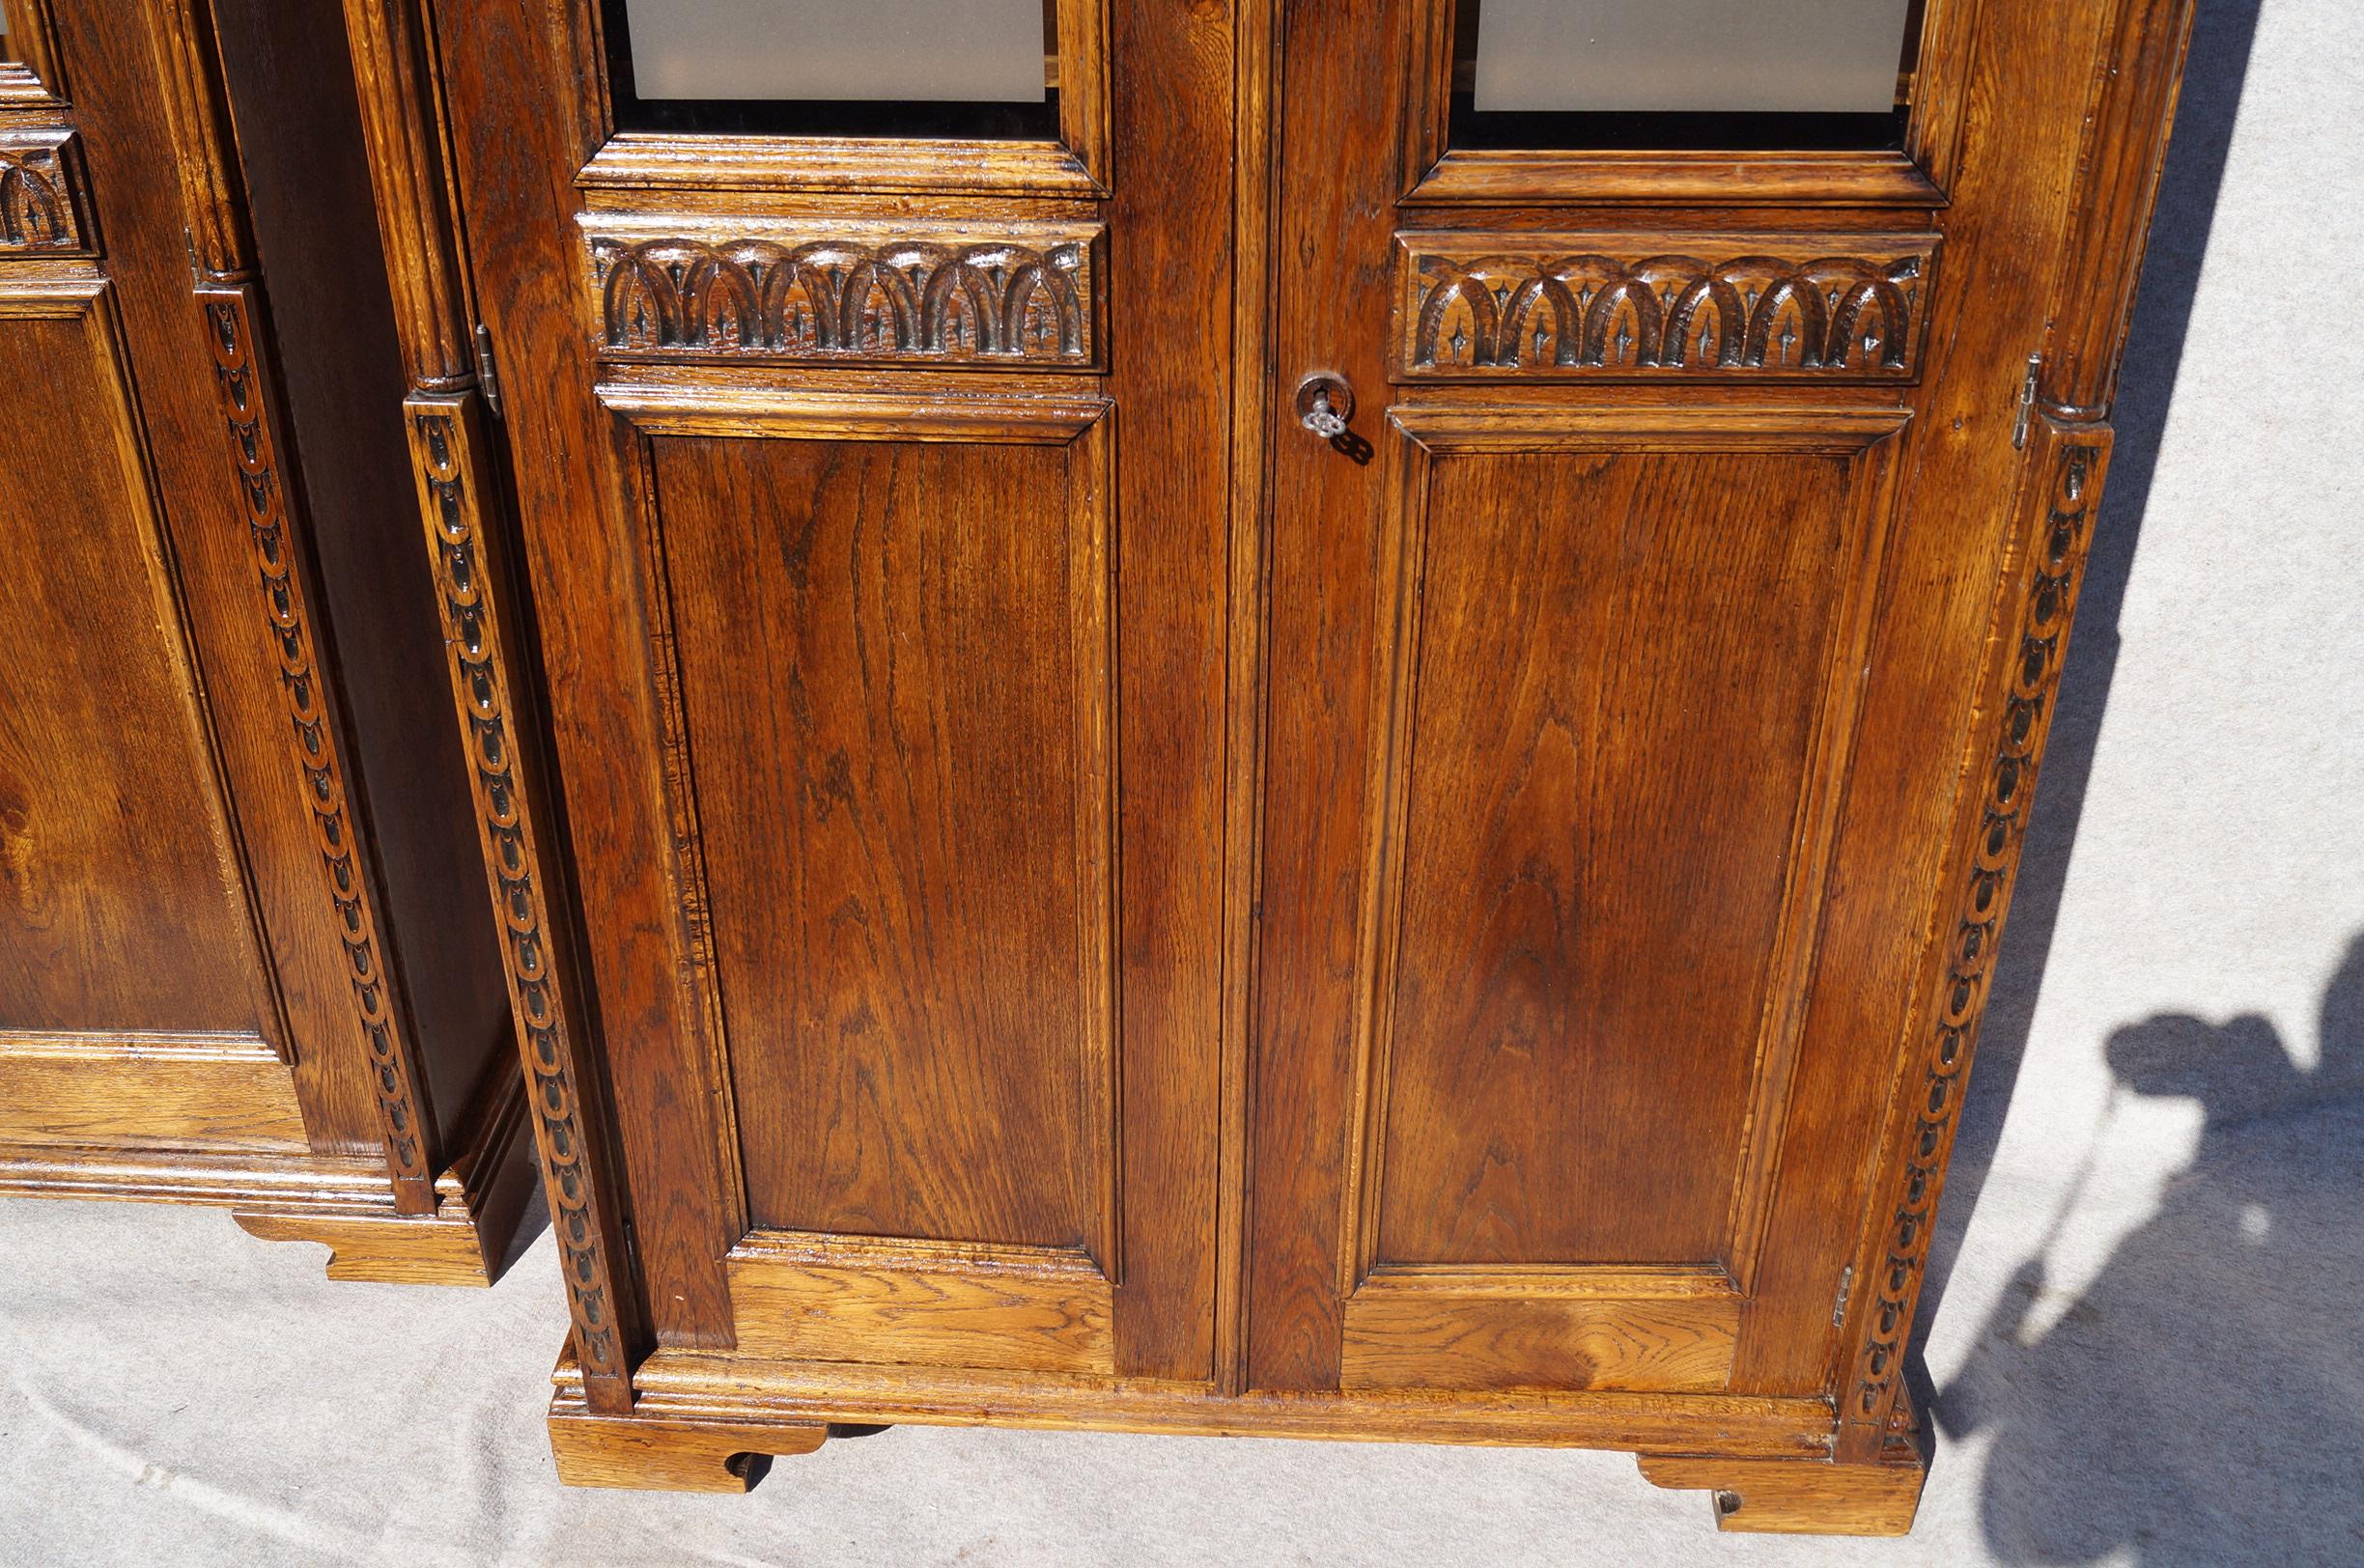 Two Eclectic Twin Bookcases from 1890 In Good Condition For Sale In Kraków, Małopolska